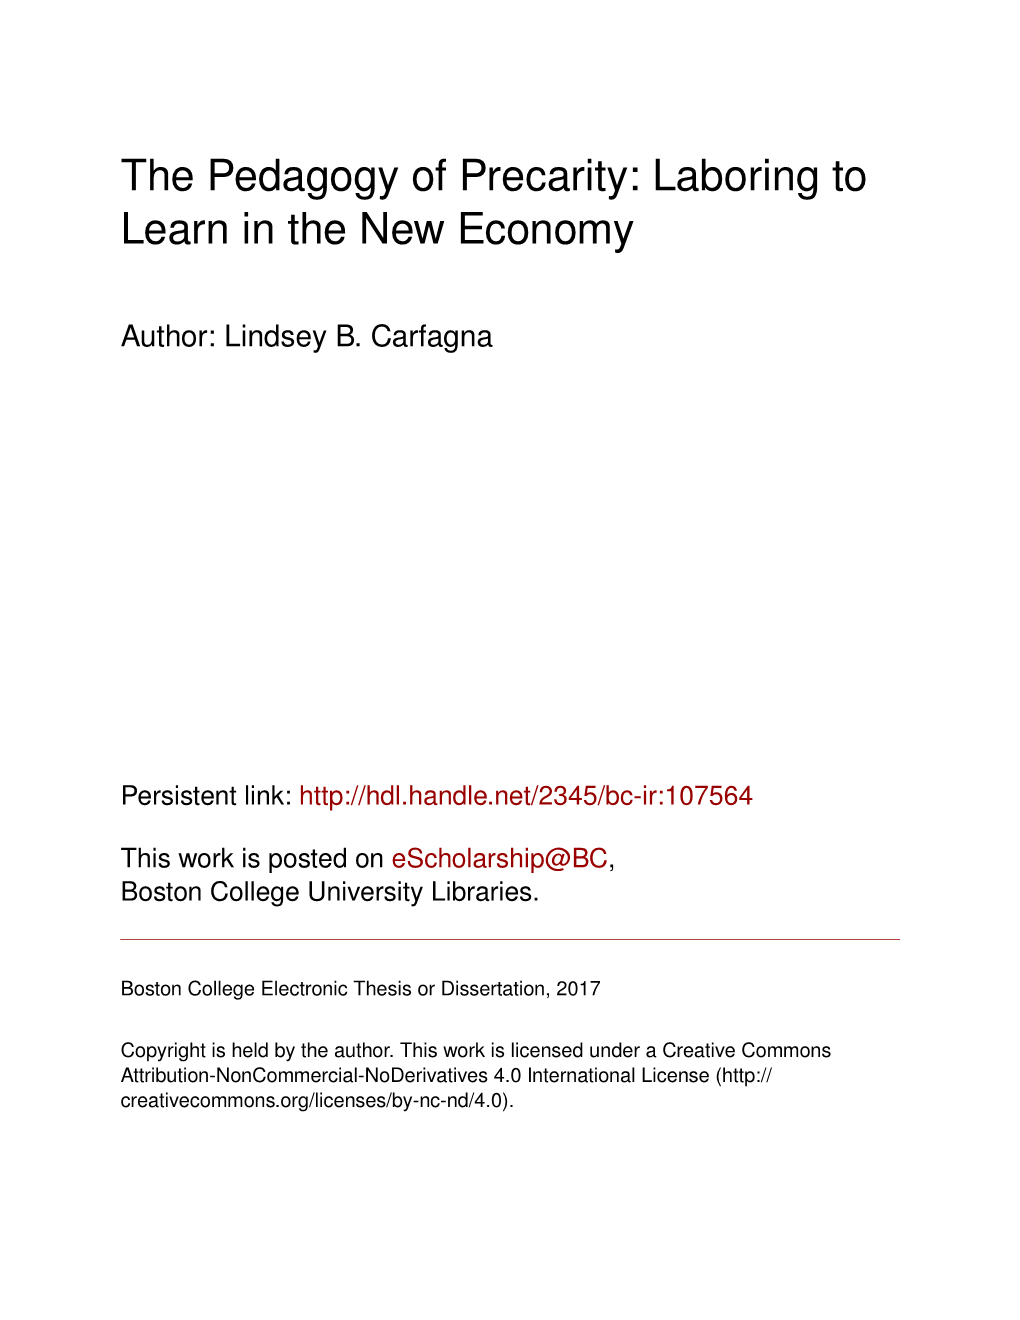 The Pedagogy of Precarity: Laboring to Learn in the New Economy